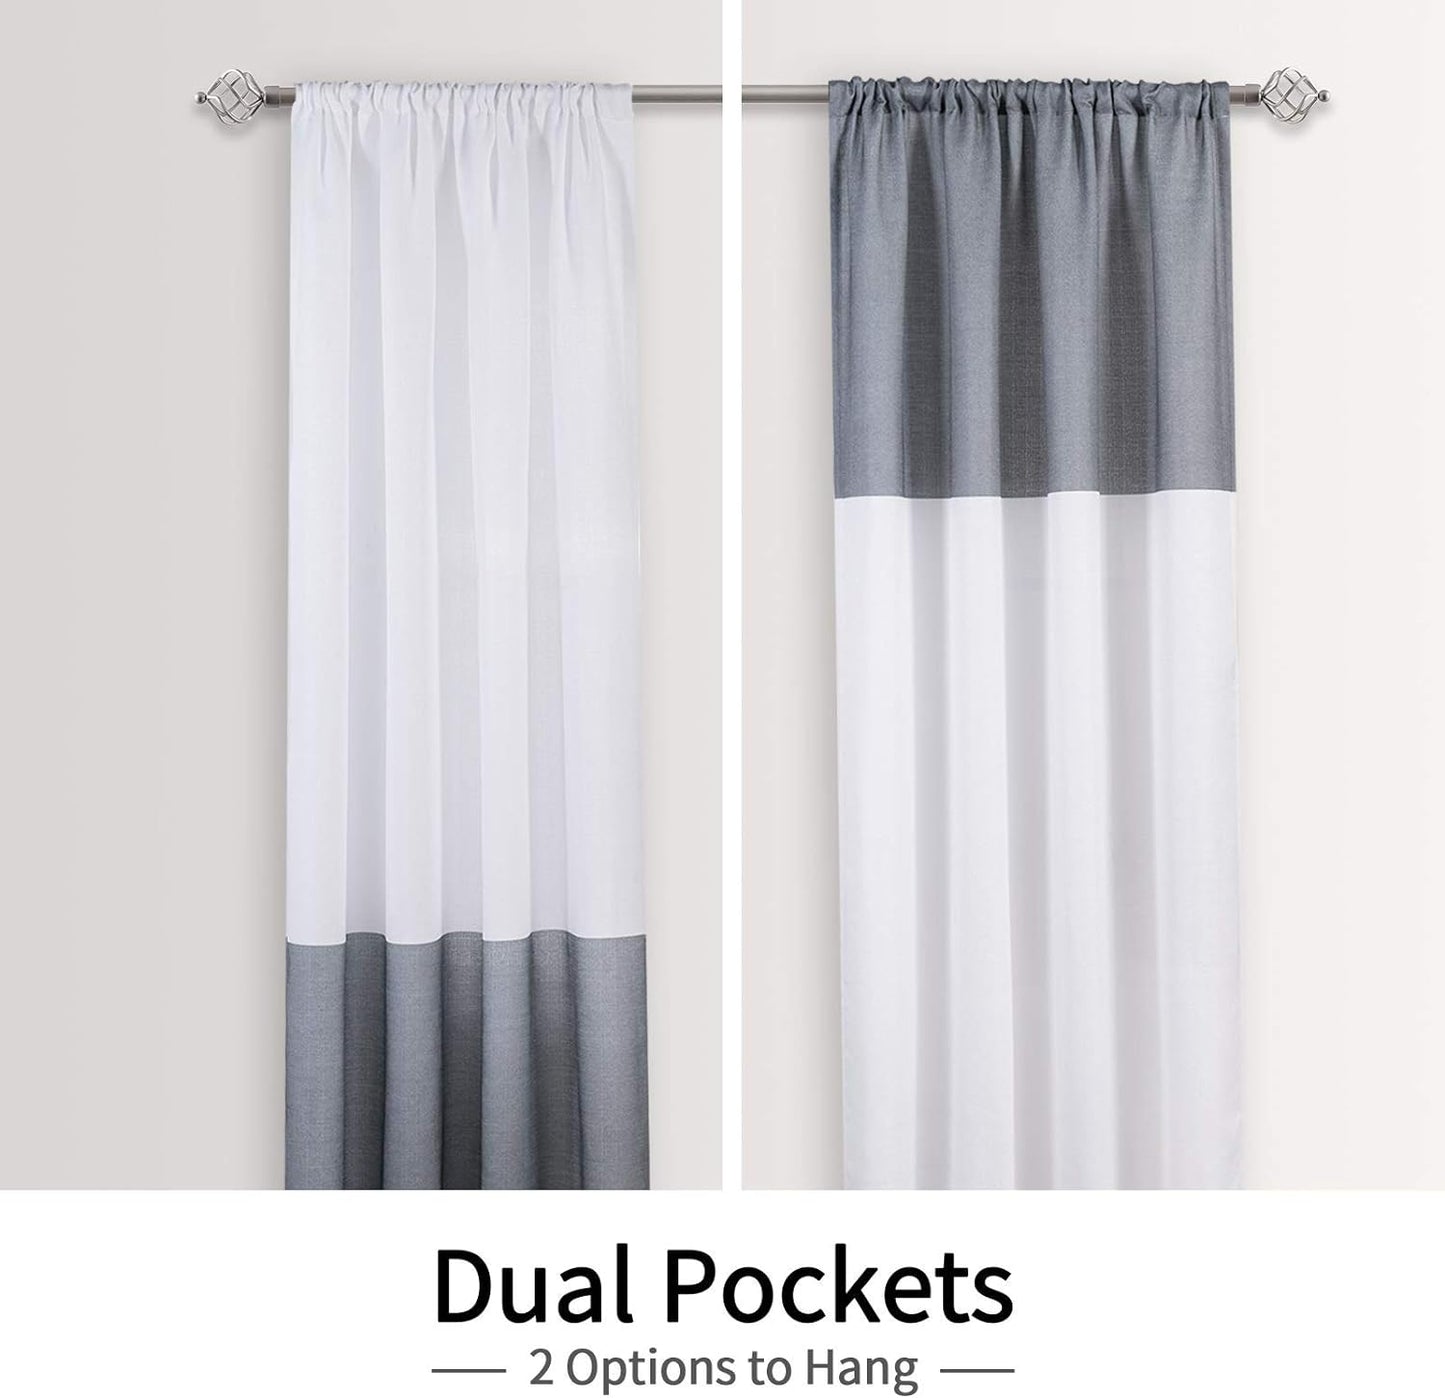 Melodieux Color Block Semi Sheer Curtains for Living Room 63 Inch Length, White Grey Linen Look Reversible Rod Pocket Window Drapes, 52 by 63 Inch (2 Panels)  Melodieux   